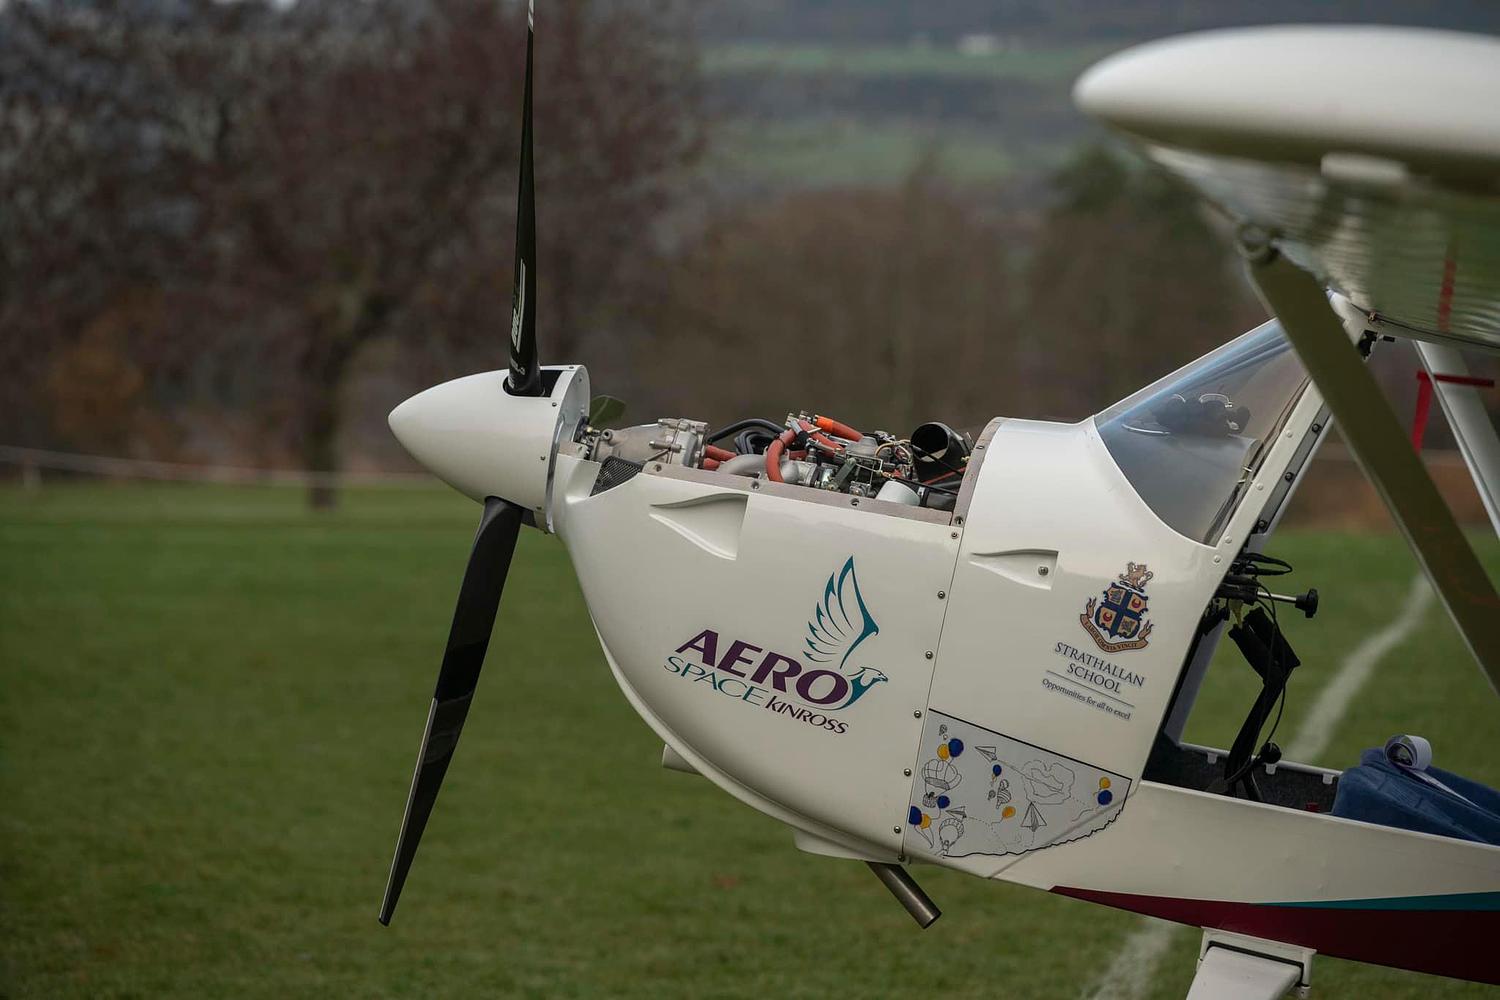 Soaring success: Fife airport welcomes Strathallan student-built plane for testing